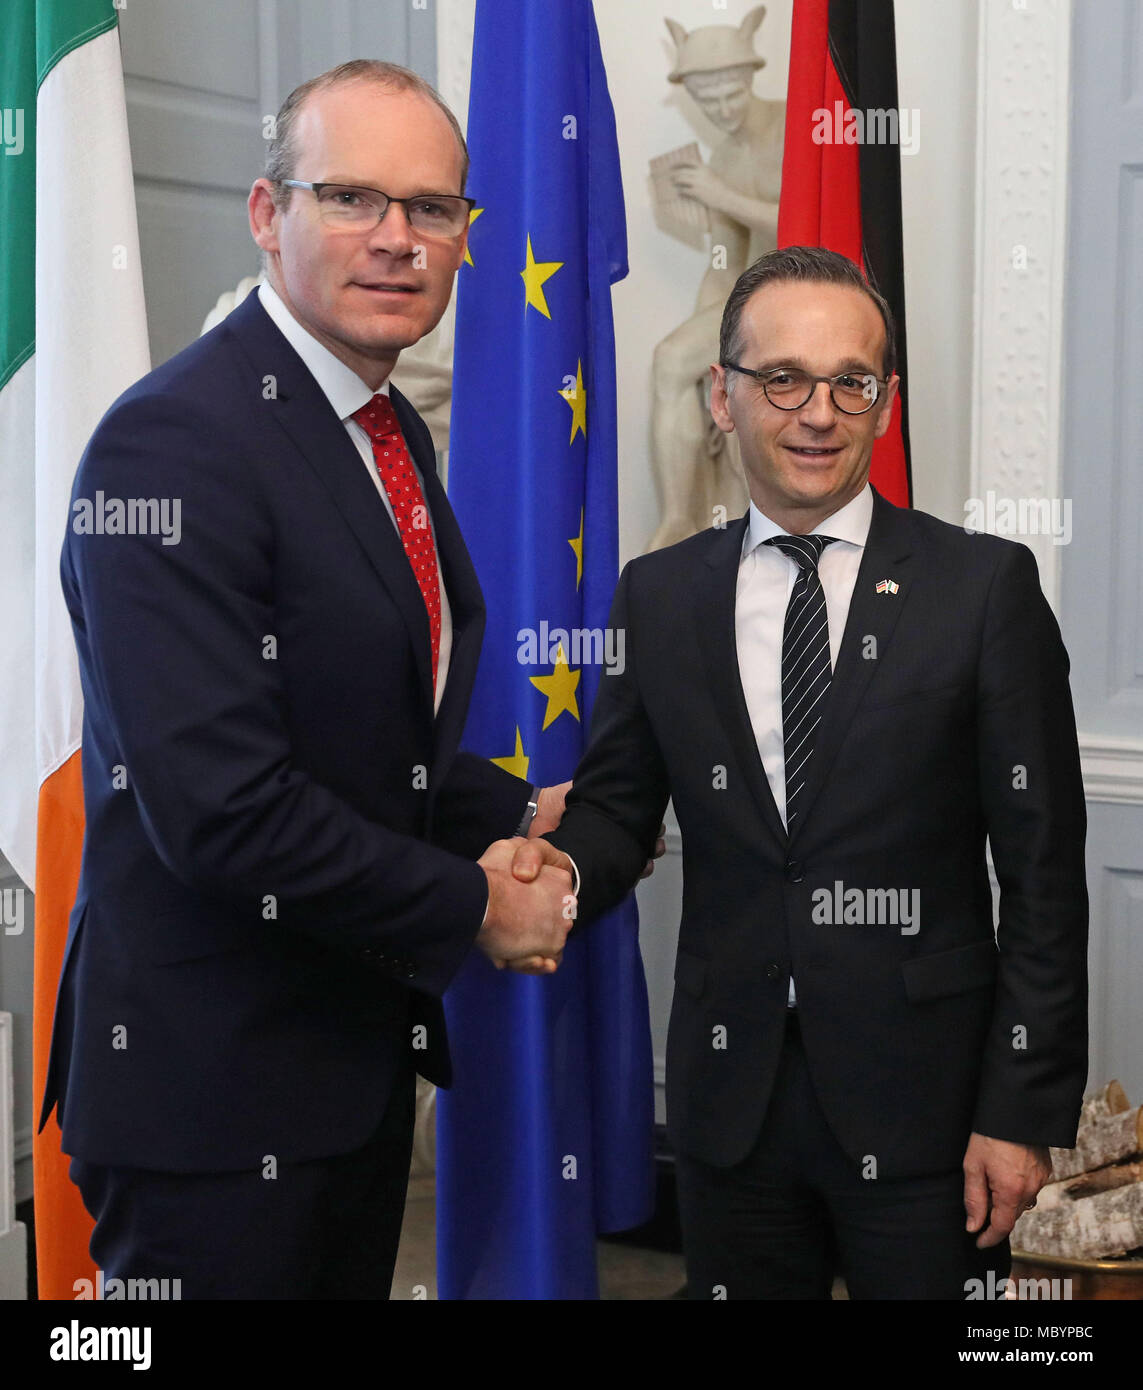 Simon Coveney, Ireland's T‡naiste (Deputy Prime Minister) and Minister for Foreign Affairs & Trade (left) with Heiko Maas, the German Federal Minister for Foreign Affairs, ahead of official talks at Iveagh House in Dublin. Stock Photo